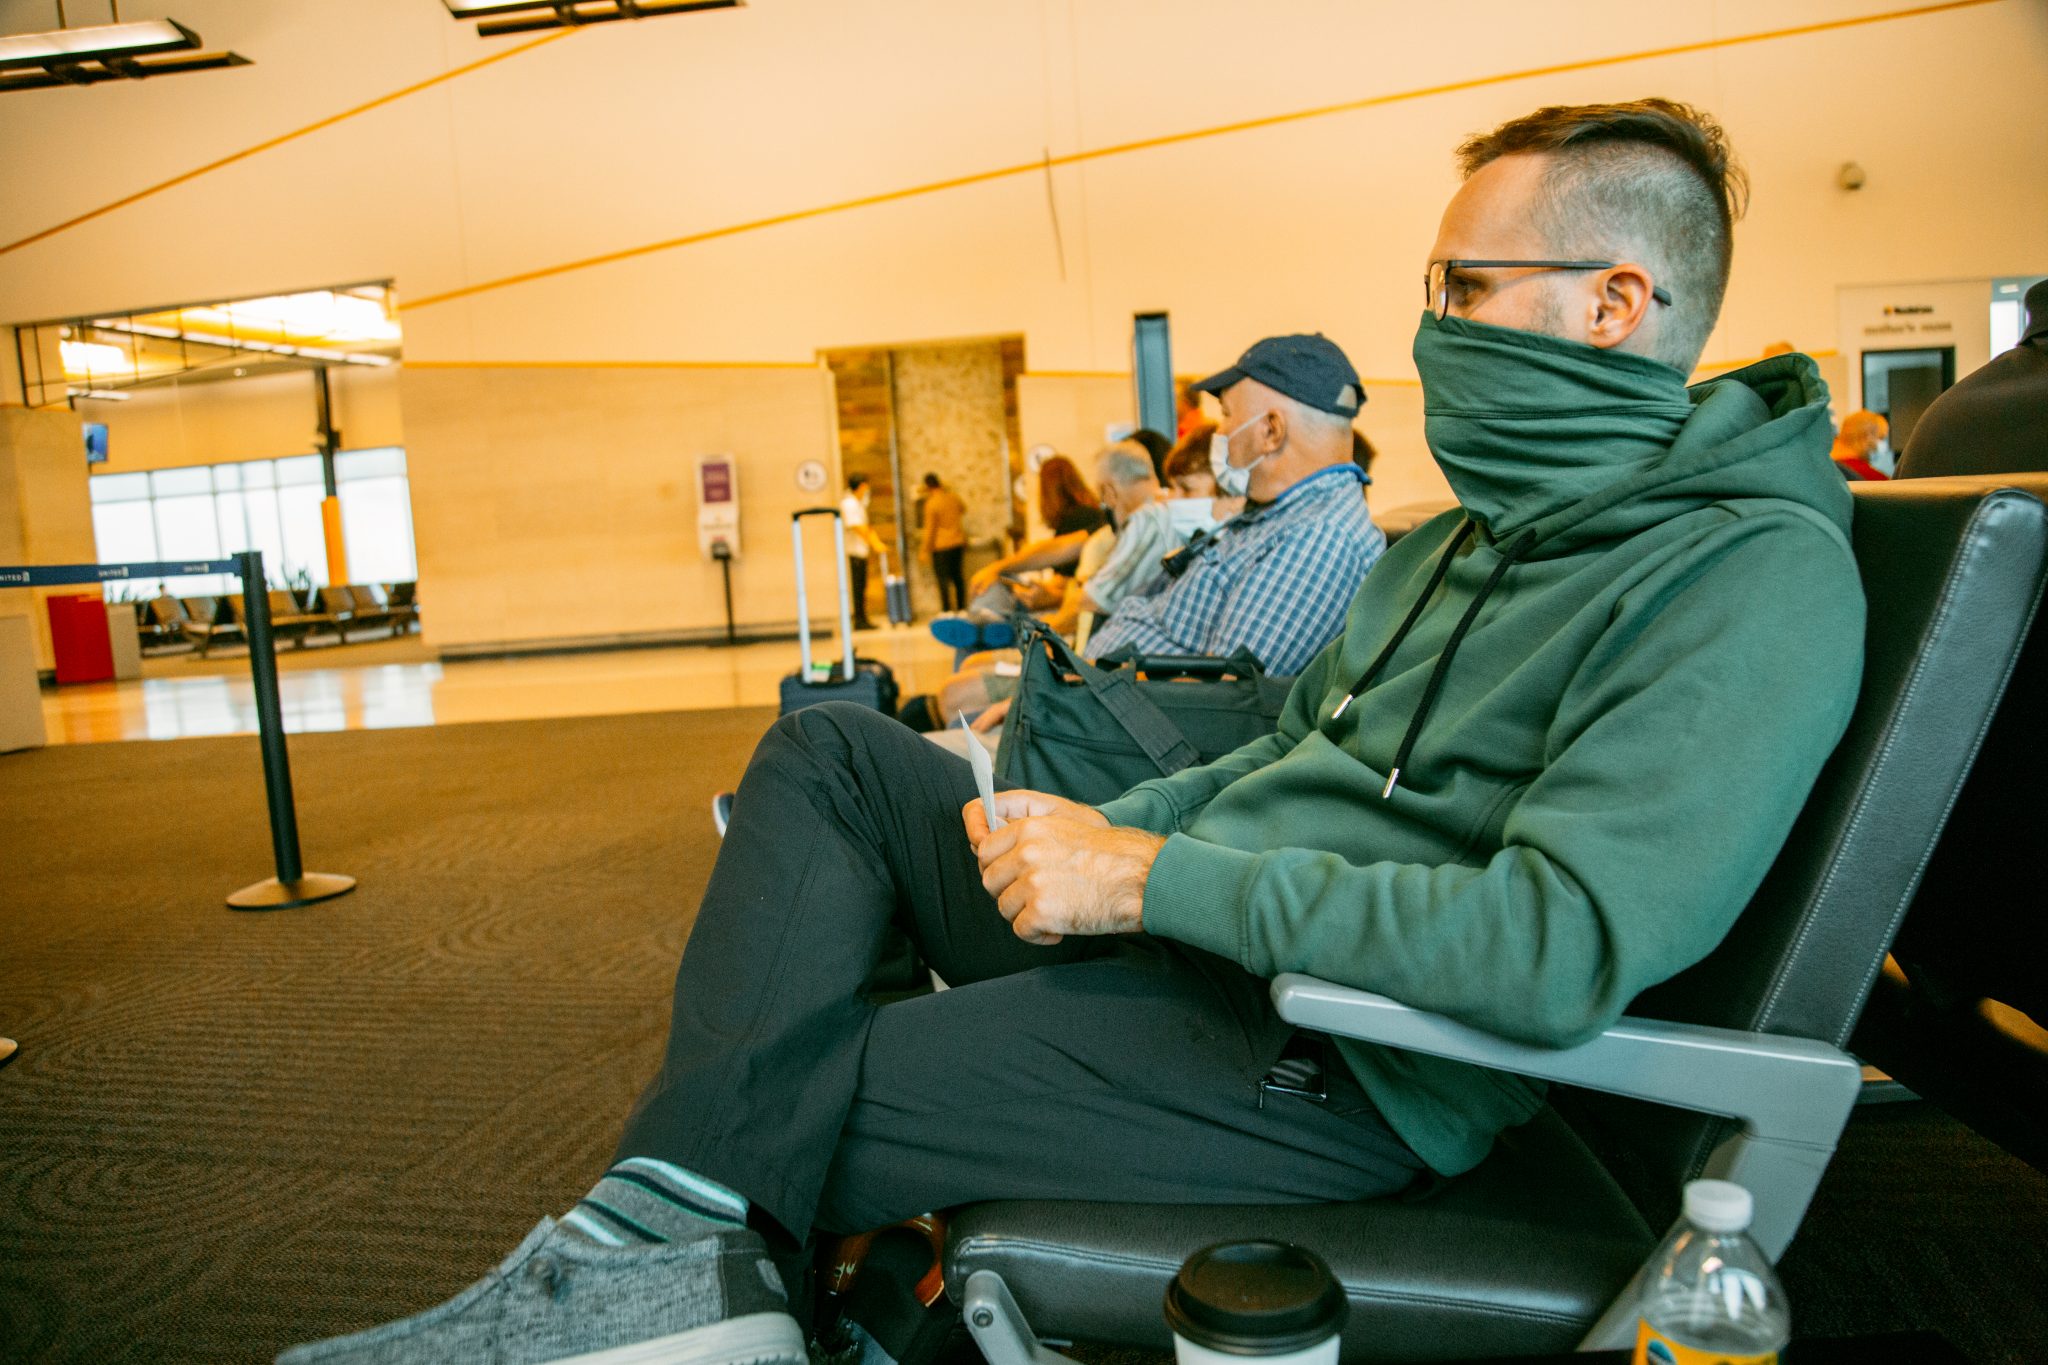 A man sits in airport chairs, wearing a green hooded sweatshirt with a turtleneck mask pulled over his face.